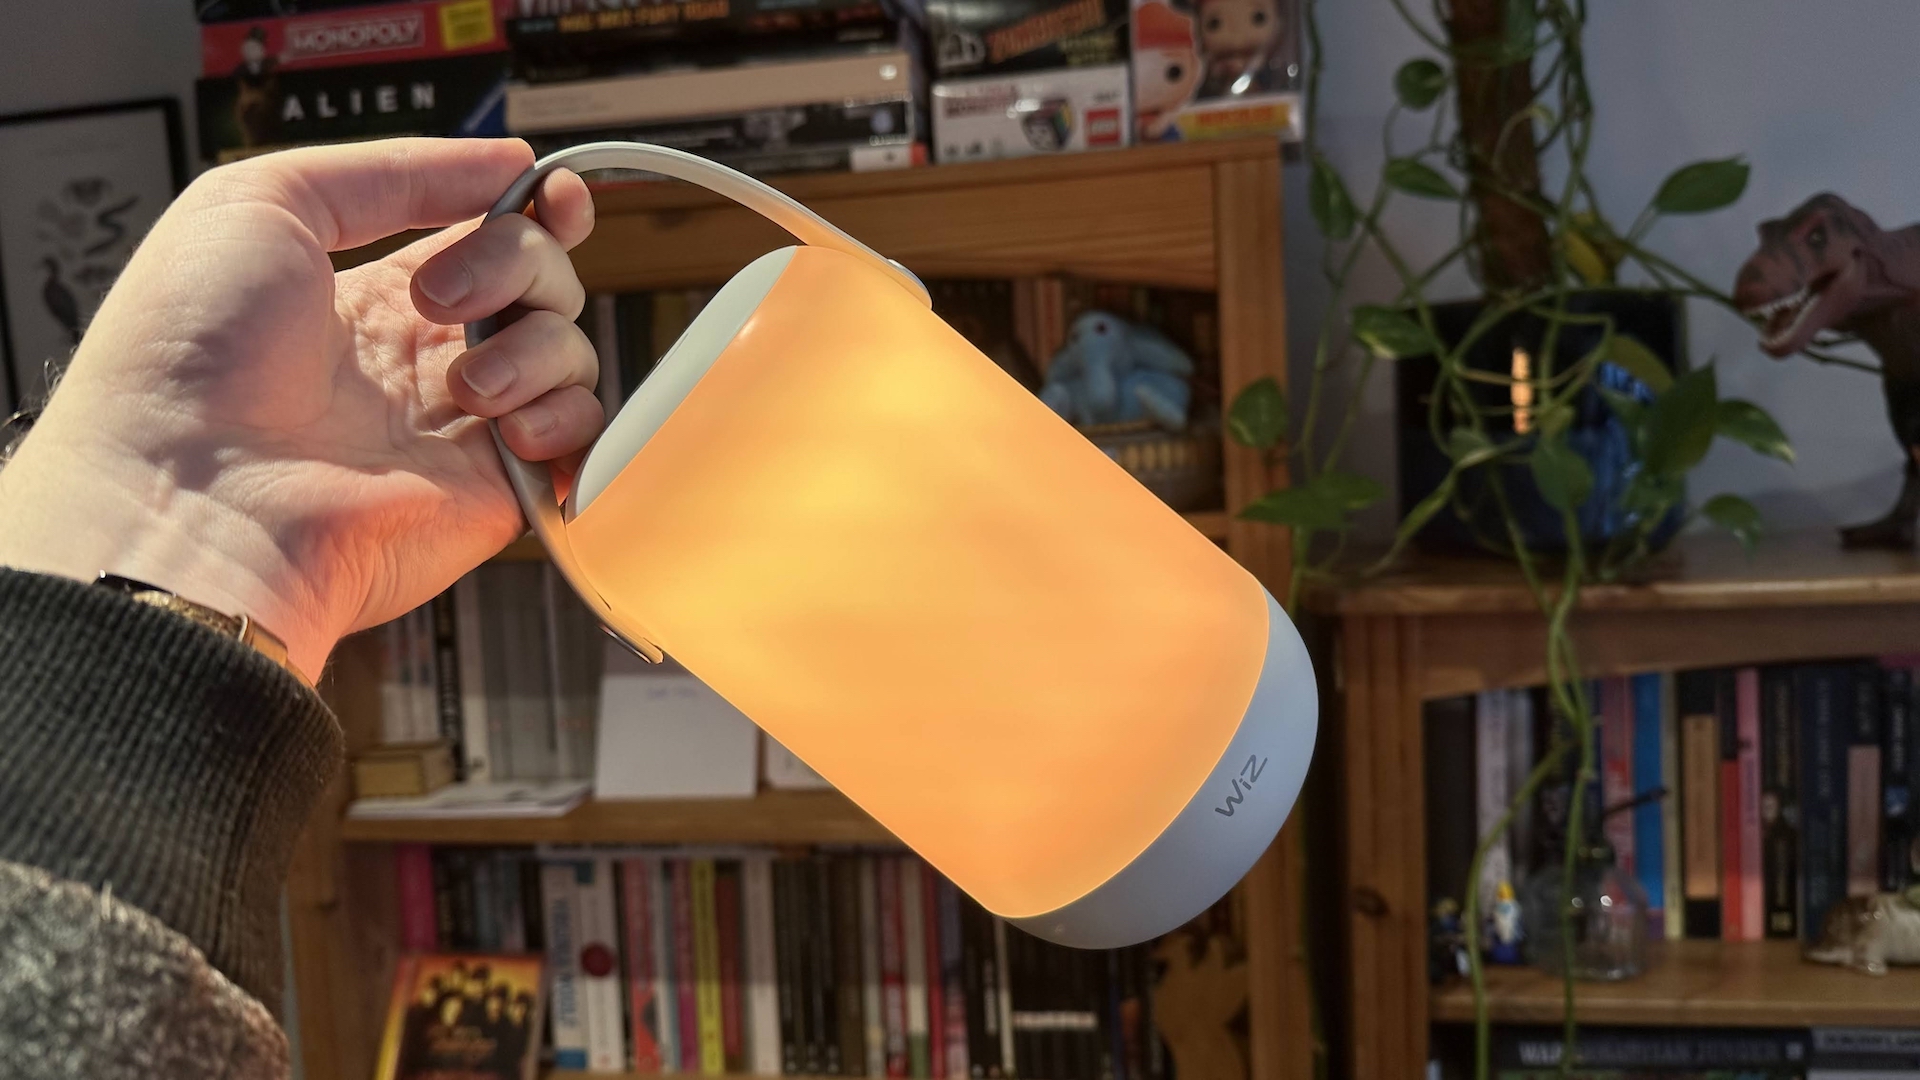 WiZ Luminaire Mobile Portable Light glowing thanks to its app settings